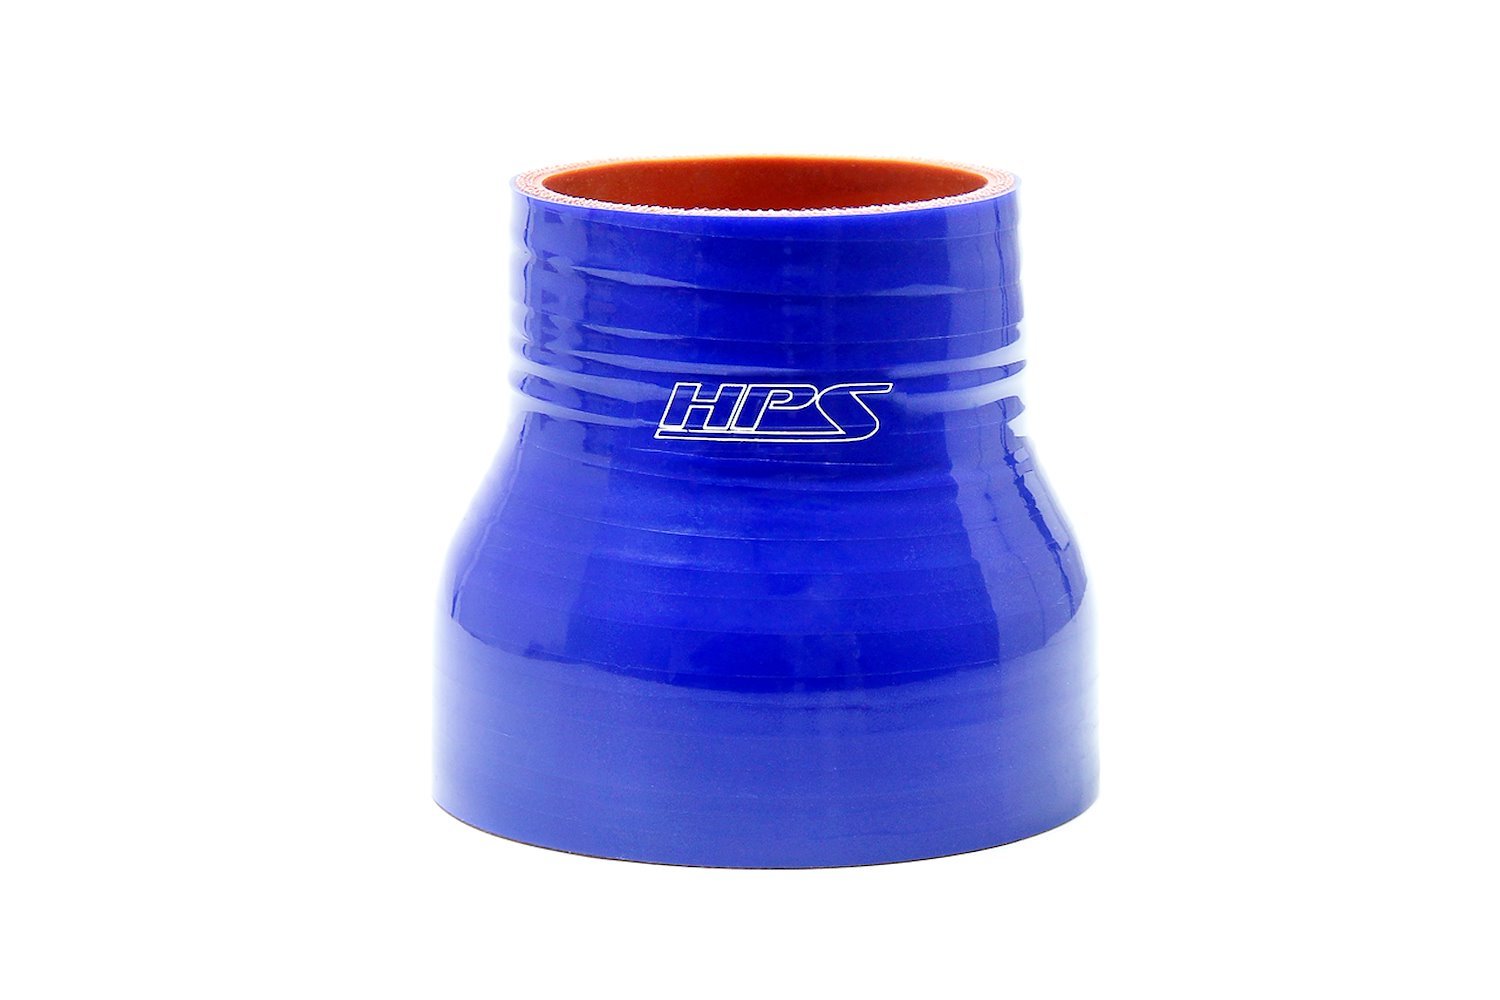 HTSR-150-225-BLUE Silicone Reducer Hose, High-Temp 4-Ply Reinforced, 1-1/2 in. - 2-1/4 in. ID, 3 in. Long, Blue